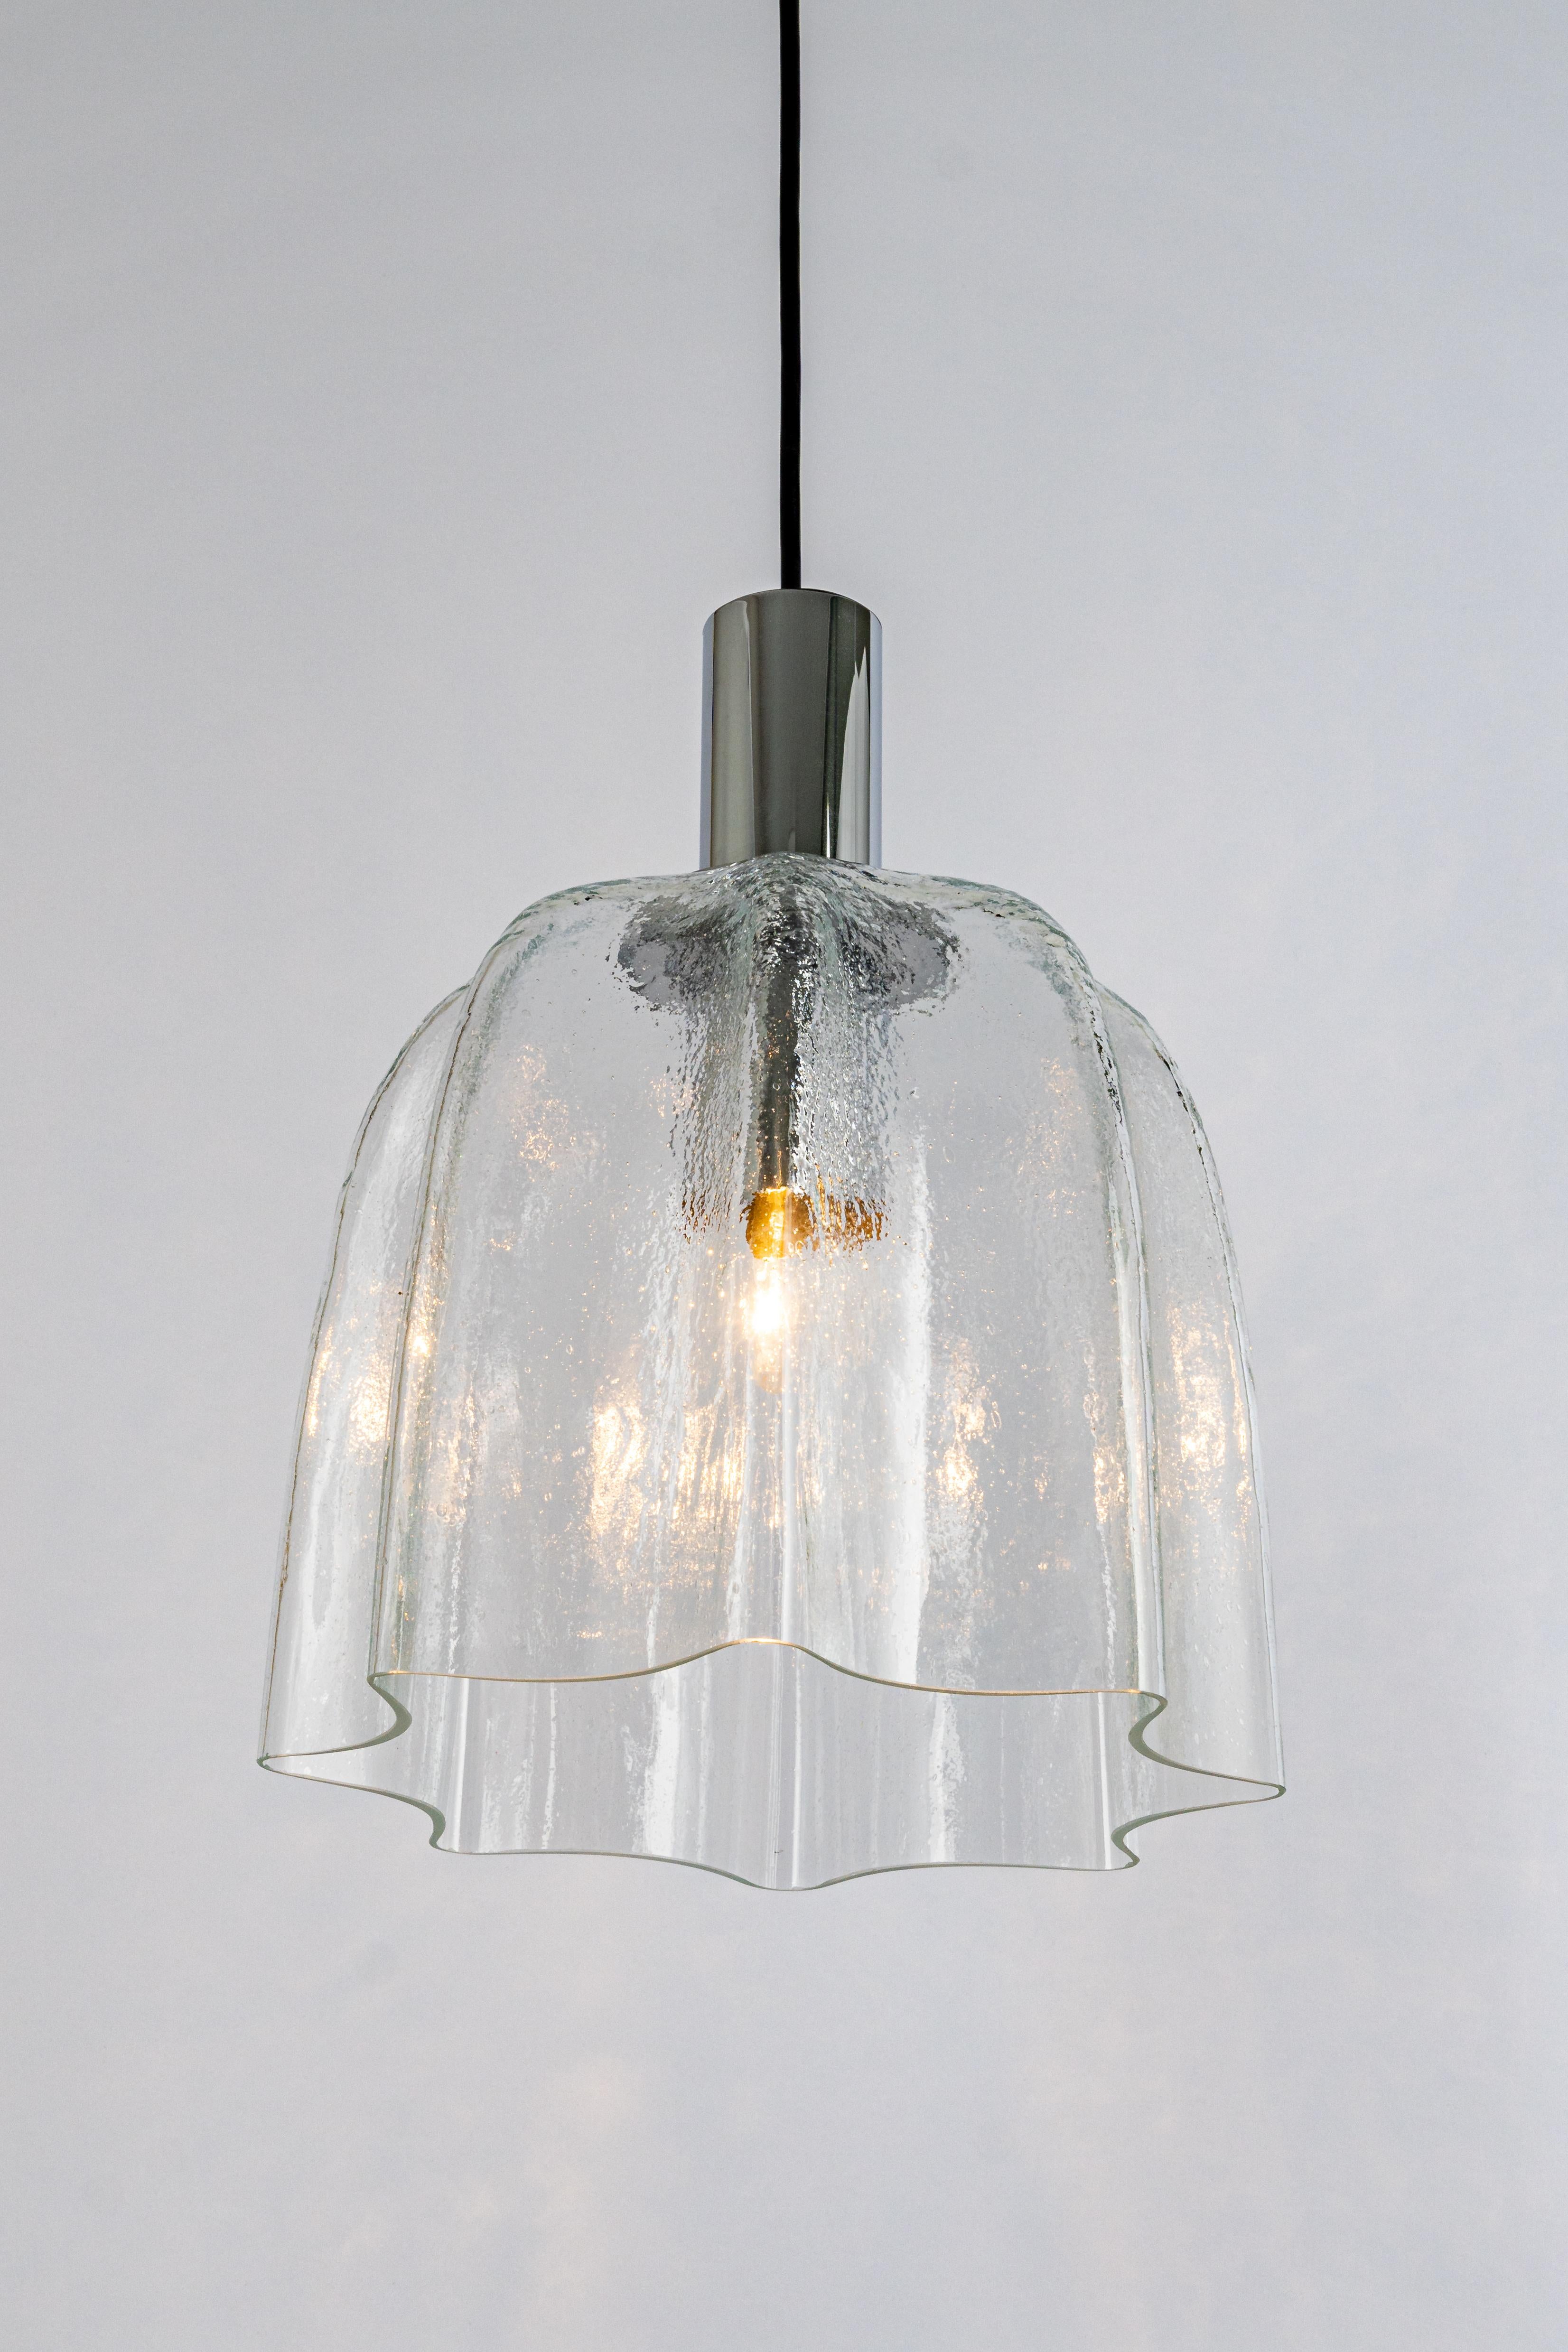 1 of 5 large round glass pendants with chrome frame designed by Limburg, manufactured in Germany, circa 1970s
Wonderful light effect.

Sockets: Each Pendant needs 1 x E27 standard bulb.
Light bulbs are not included. It is possible to install